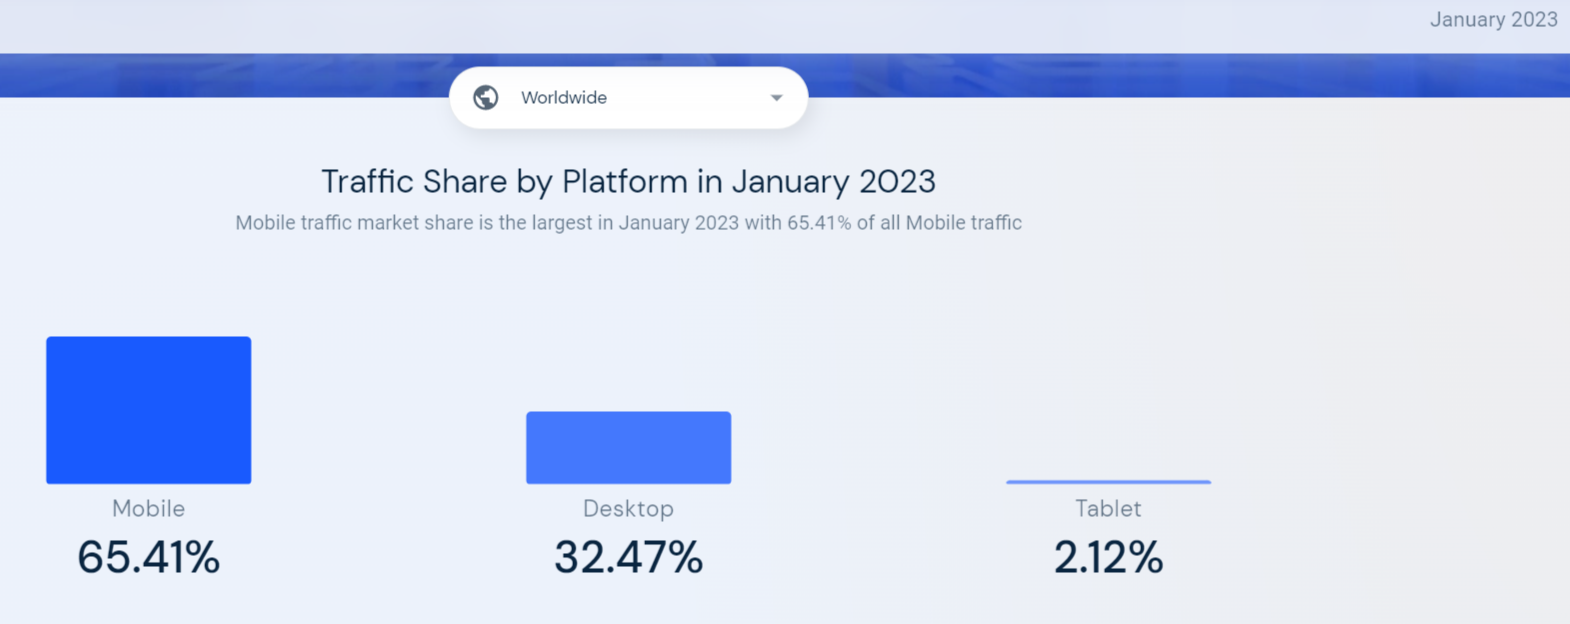 Over the last year, mobile users have made up more than 60% of the total online traffic share. In January 2023, mobile users represented 65.41% of this traffic compared to 35.47% for desktop users and 2.12% for tablet users. (similarweb, 2023)